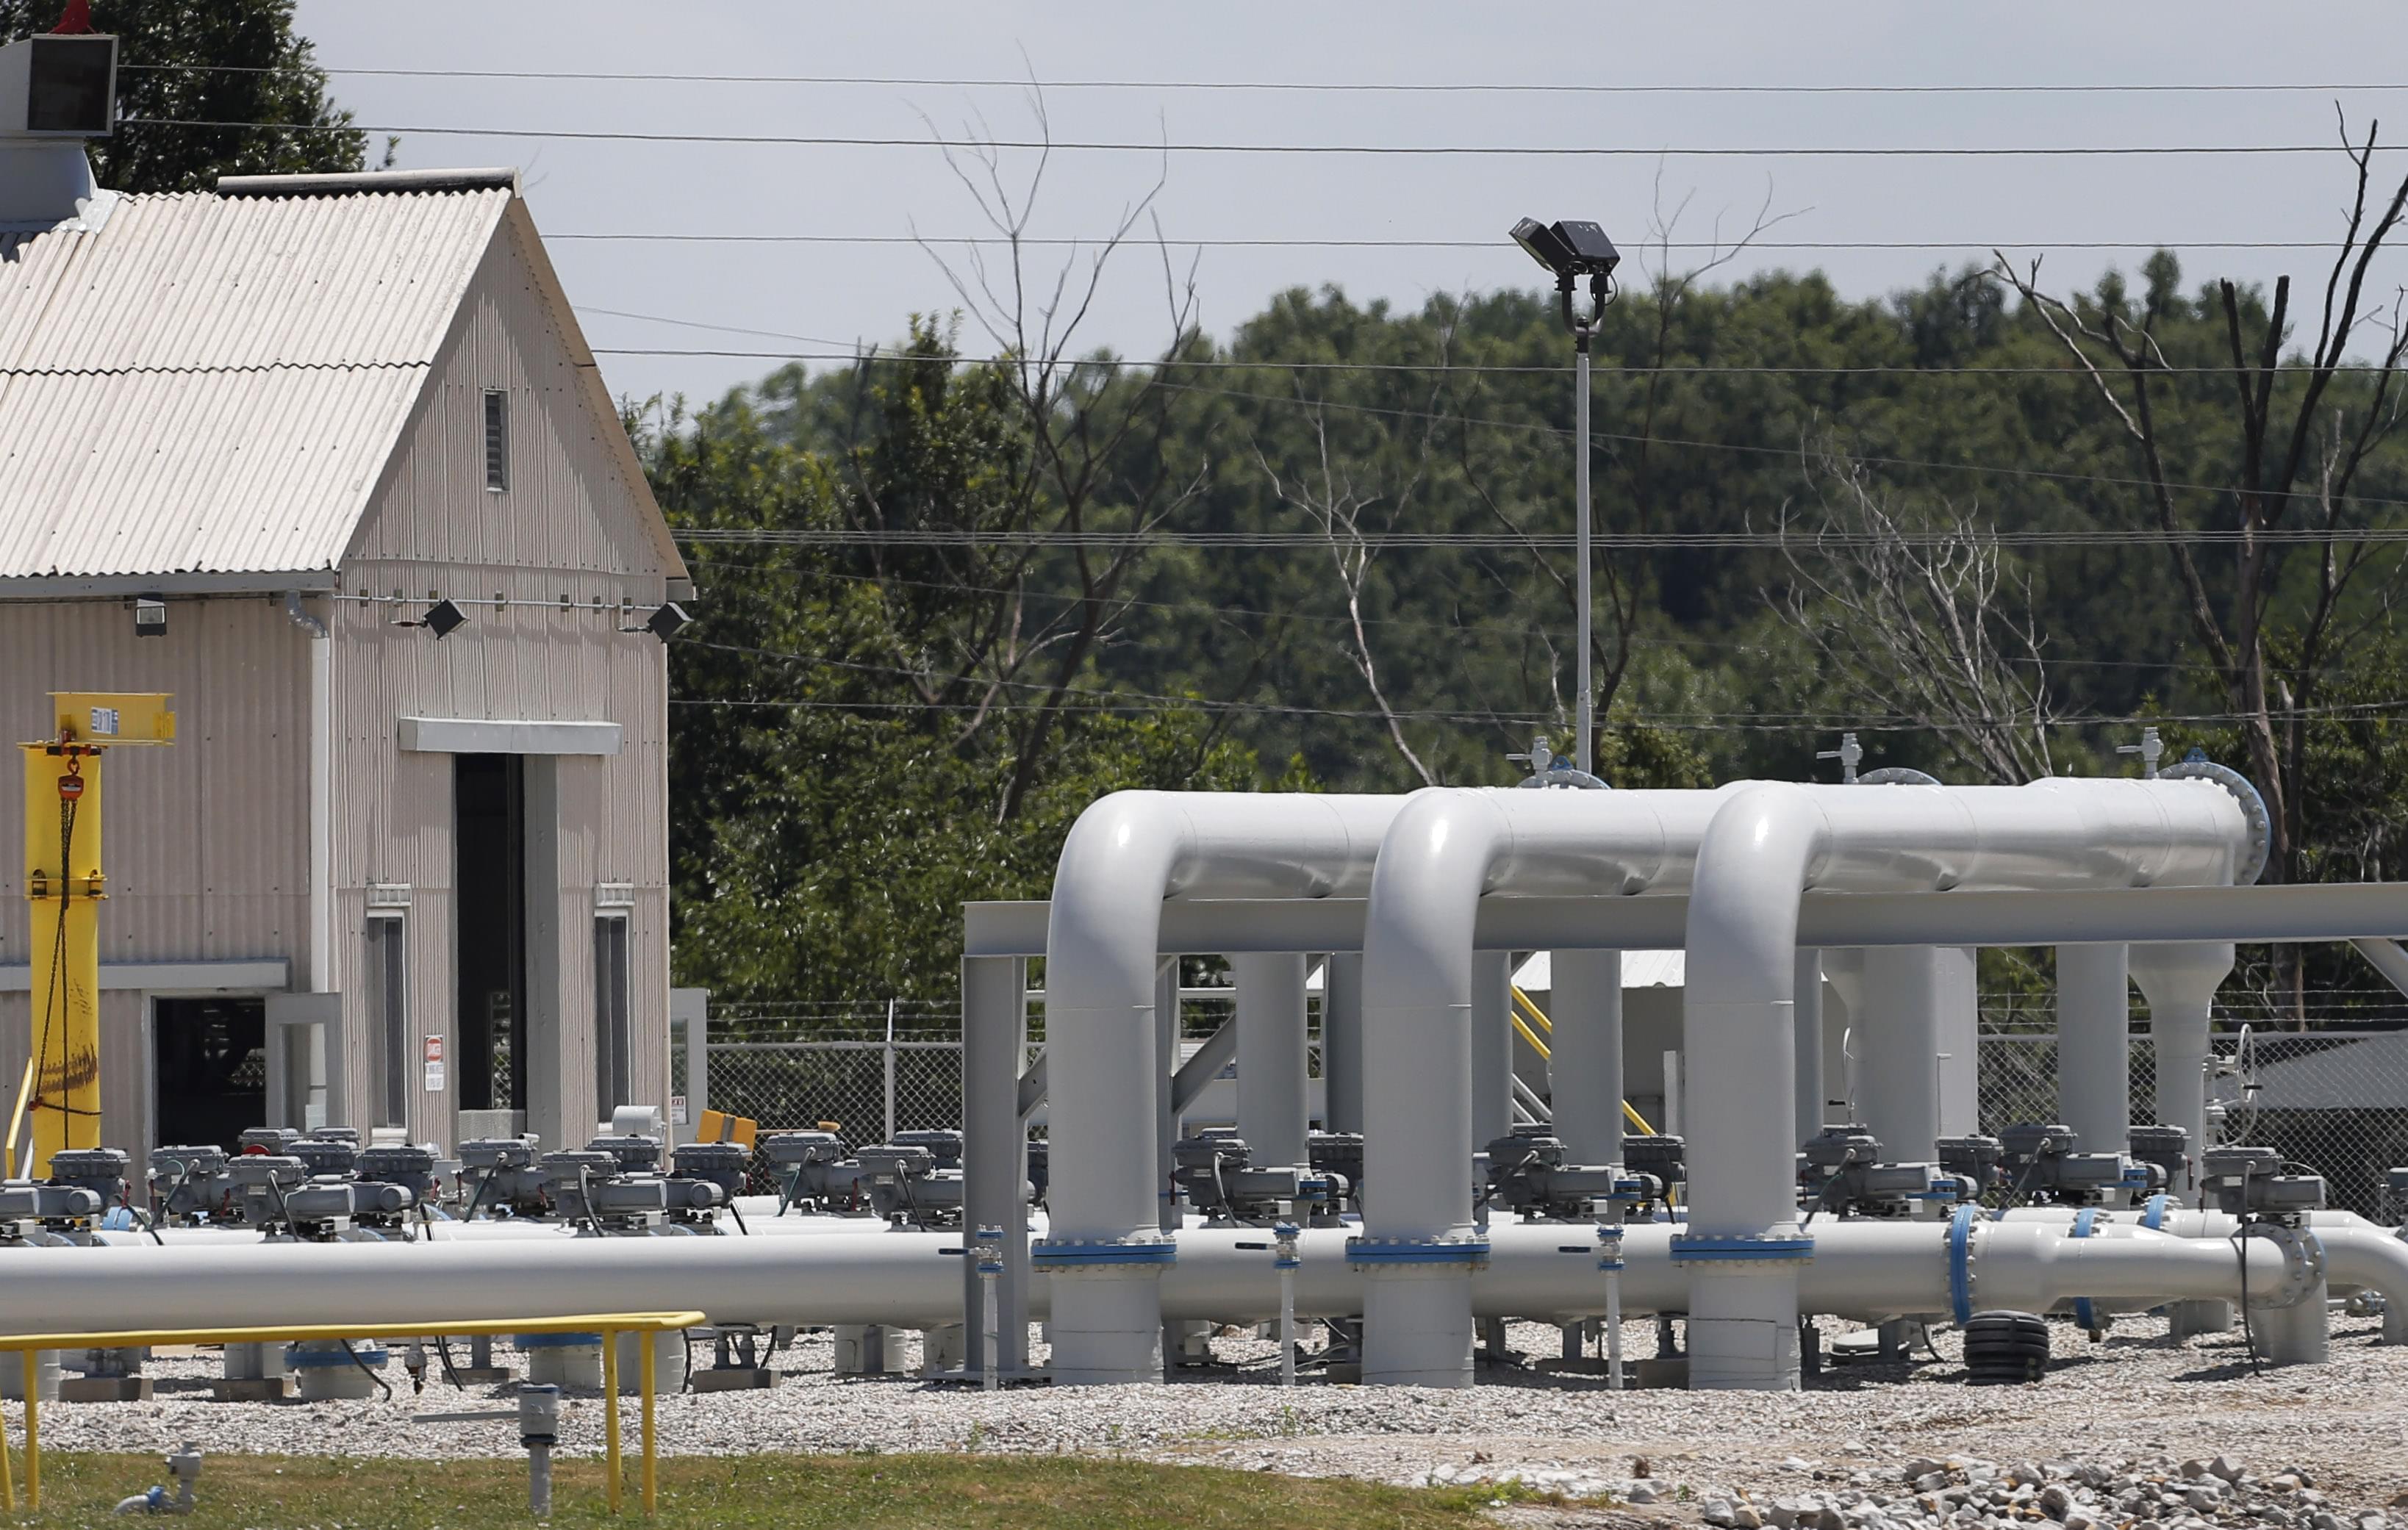 Pipe for Flanagan South Pipeline extends near Salisbury, Missouri in July 2013.